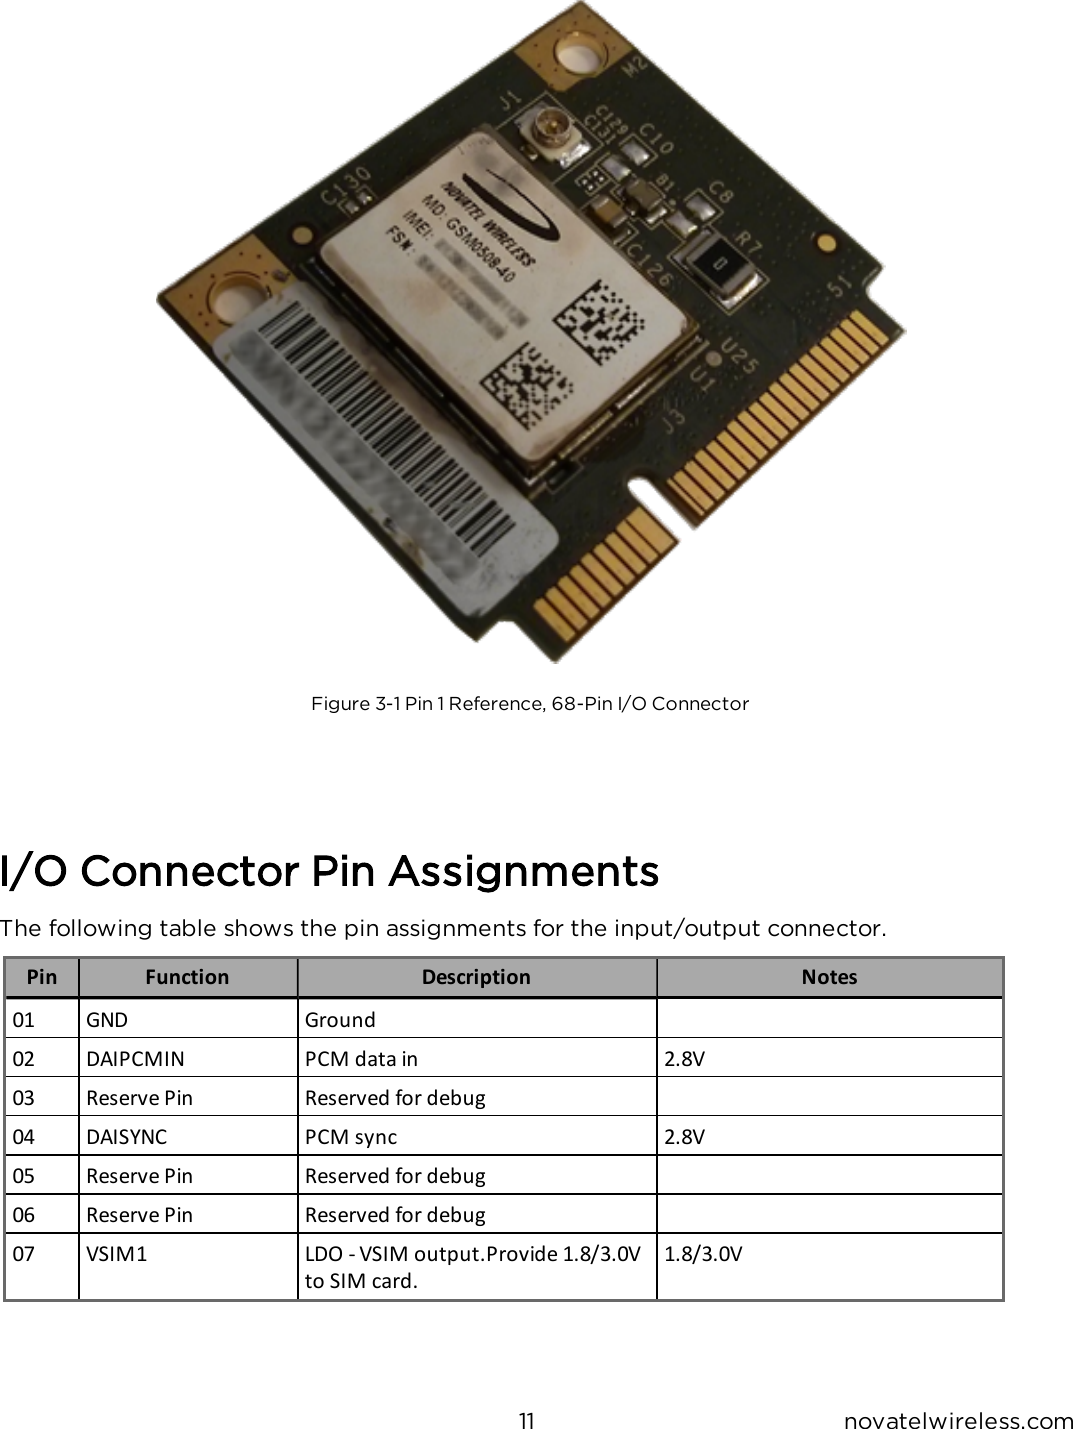 11 novatelwireless.comFigure 3-1 Pin 1 Reference, 68-Pin I/O ConnectorI/O Connector Pin AssignmentsThe following table shows the pin assignments for the input/output connector.Pin Function Description Notes01 GND Ground02 DAIPCMIN PCM data in 2.8V03 Reserve Pin Reserved for debug04 DAISYNC PCM sync 2.8V05 Reserve Pin Reserved for debug06 Reserve Pin Reserved for debug07 VSIM1 LDO - VSIM output.Provide 1.8/3.0Vto SIM card.1.8/3.0V